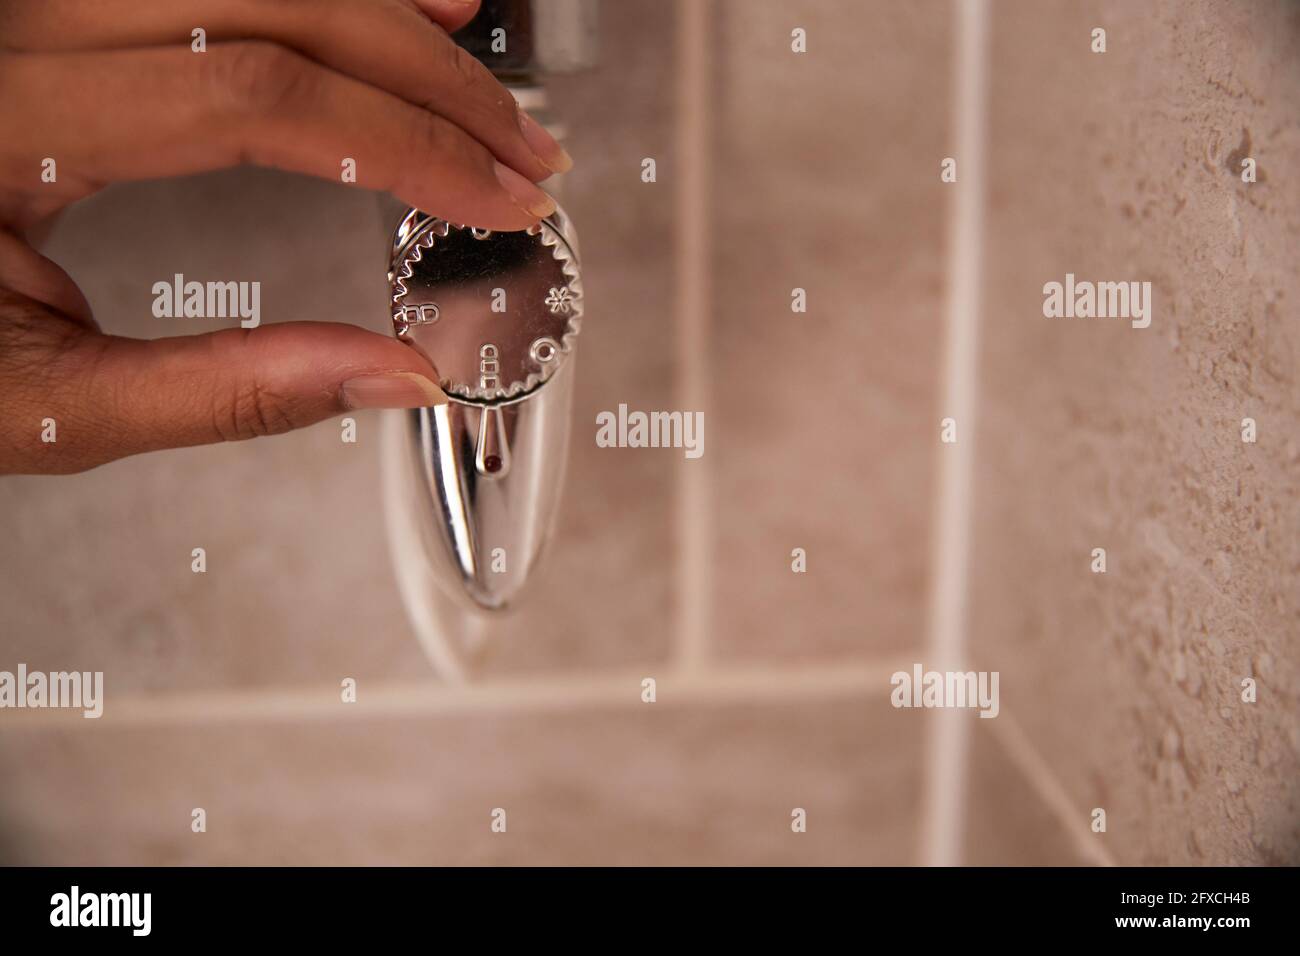 Woman holding faucet in bathroom Stock Photo